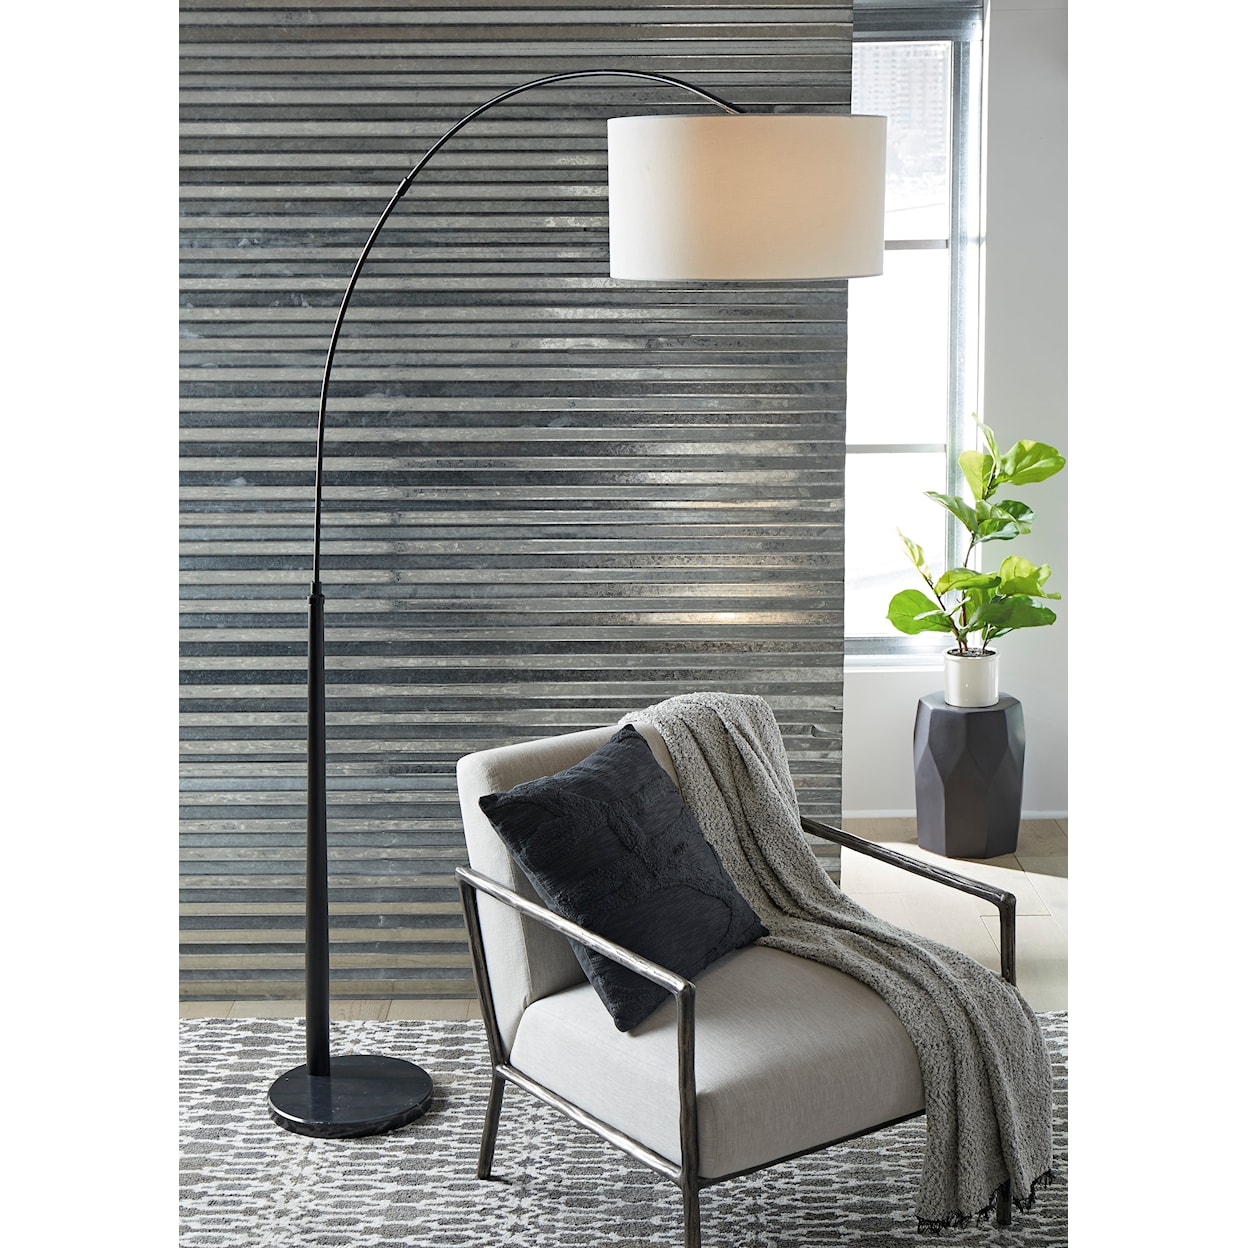 Benchcraft Lamps - Contemporary Veergate Arc Lamp